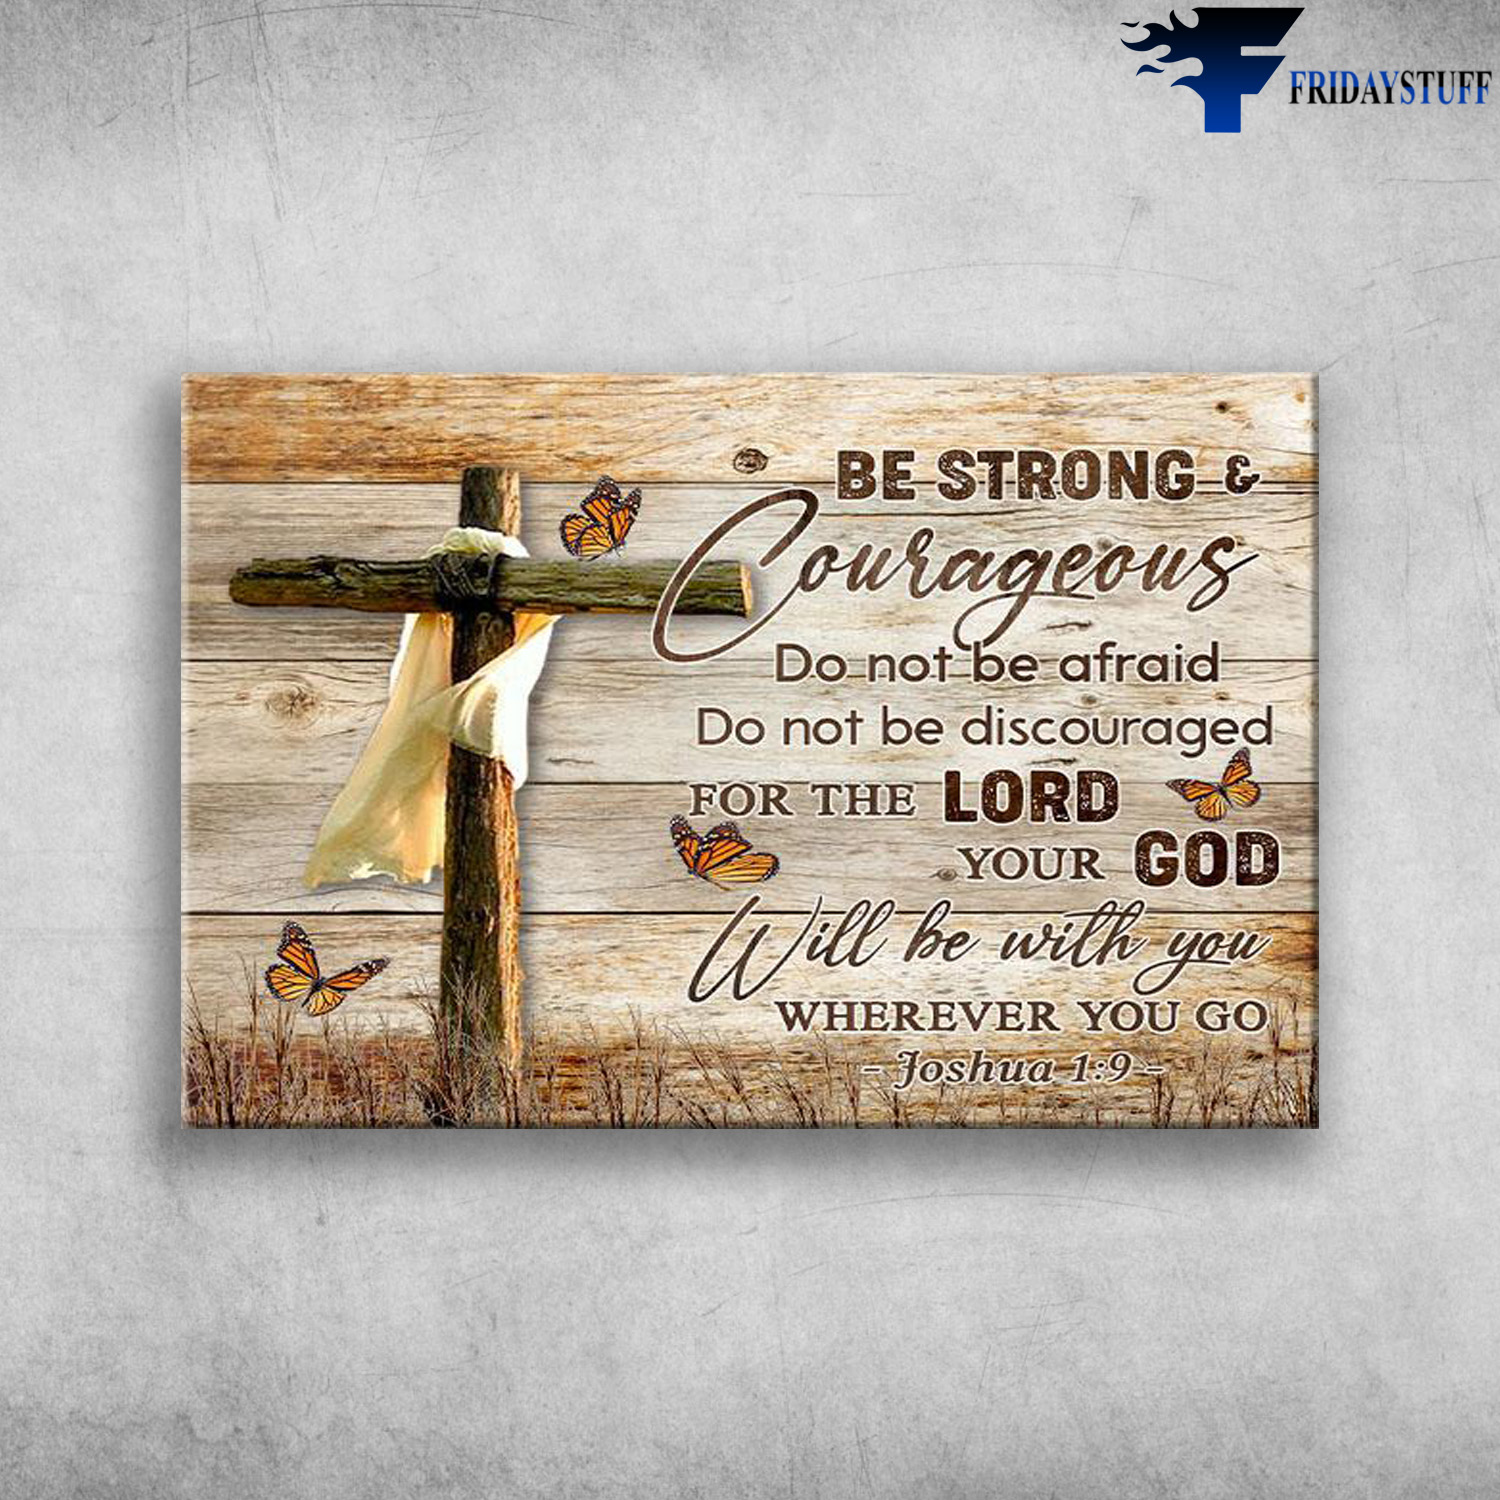 The Cross And Butterflies – Be Strong And Courageous, Do Not Be Afraid, Do Not Be Discouraged, For The Lord Your God, Will Be With You, Wherever You Go